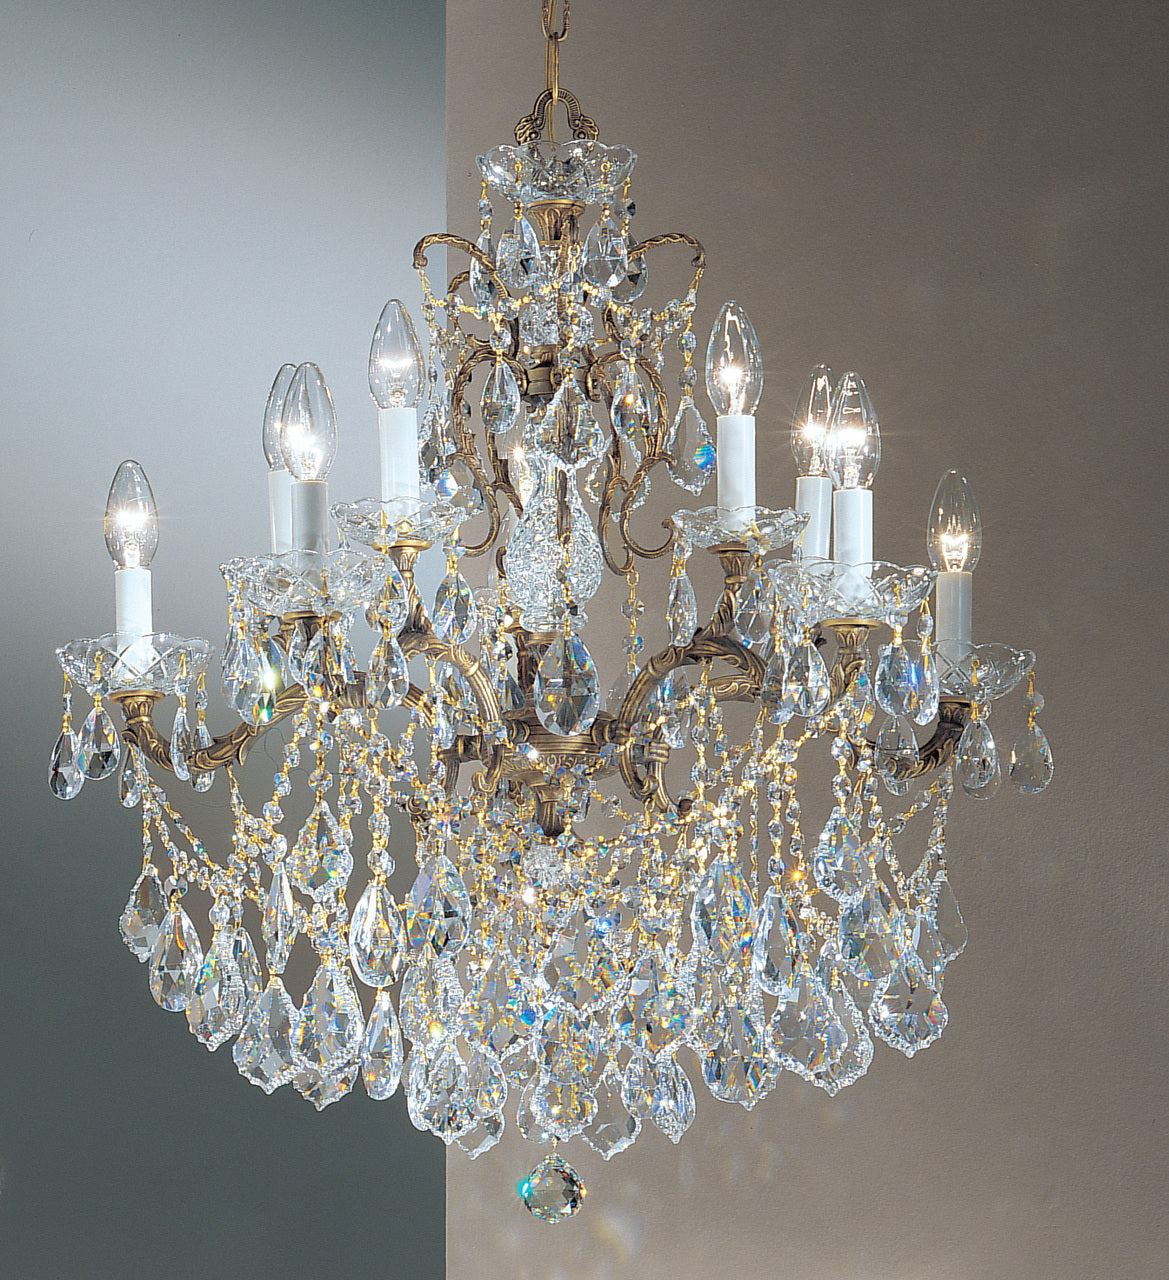 Classic Lighting 5540 RB C Madrid Imperial Crystal/Cast Brass Chandelier in Roman Bronze (Imported from Spain)